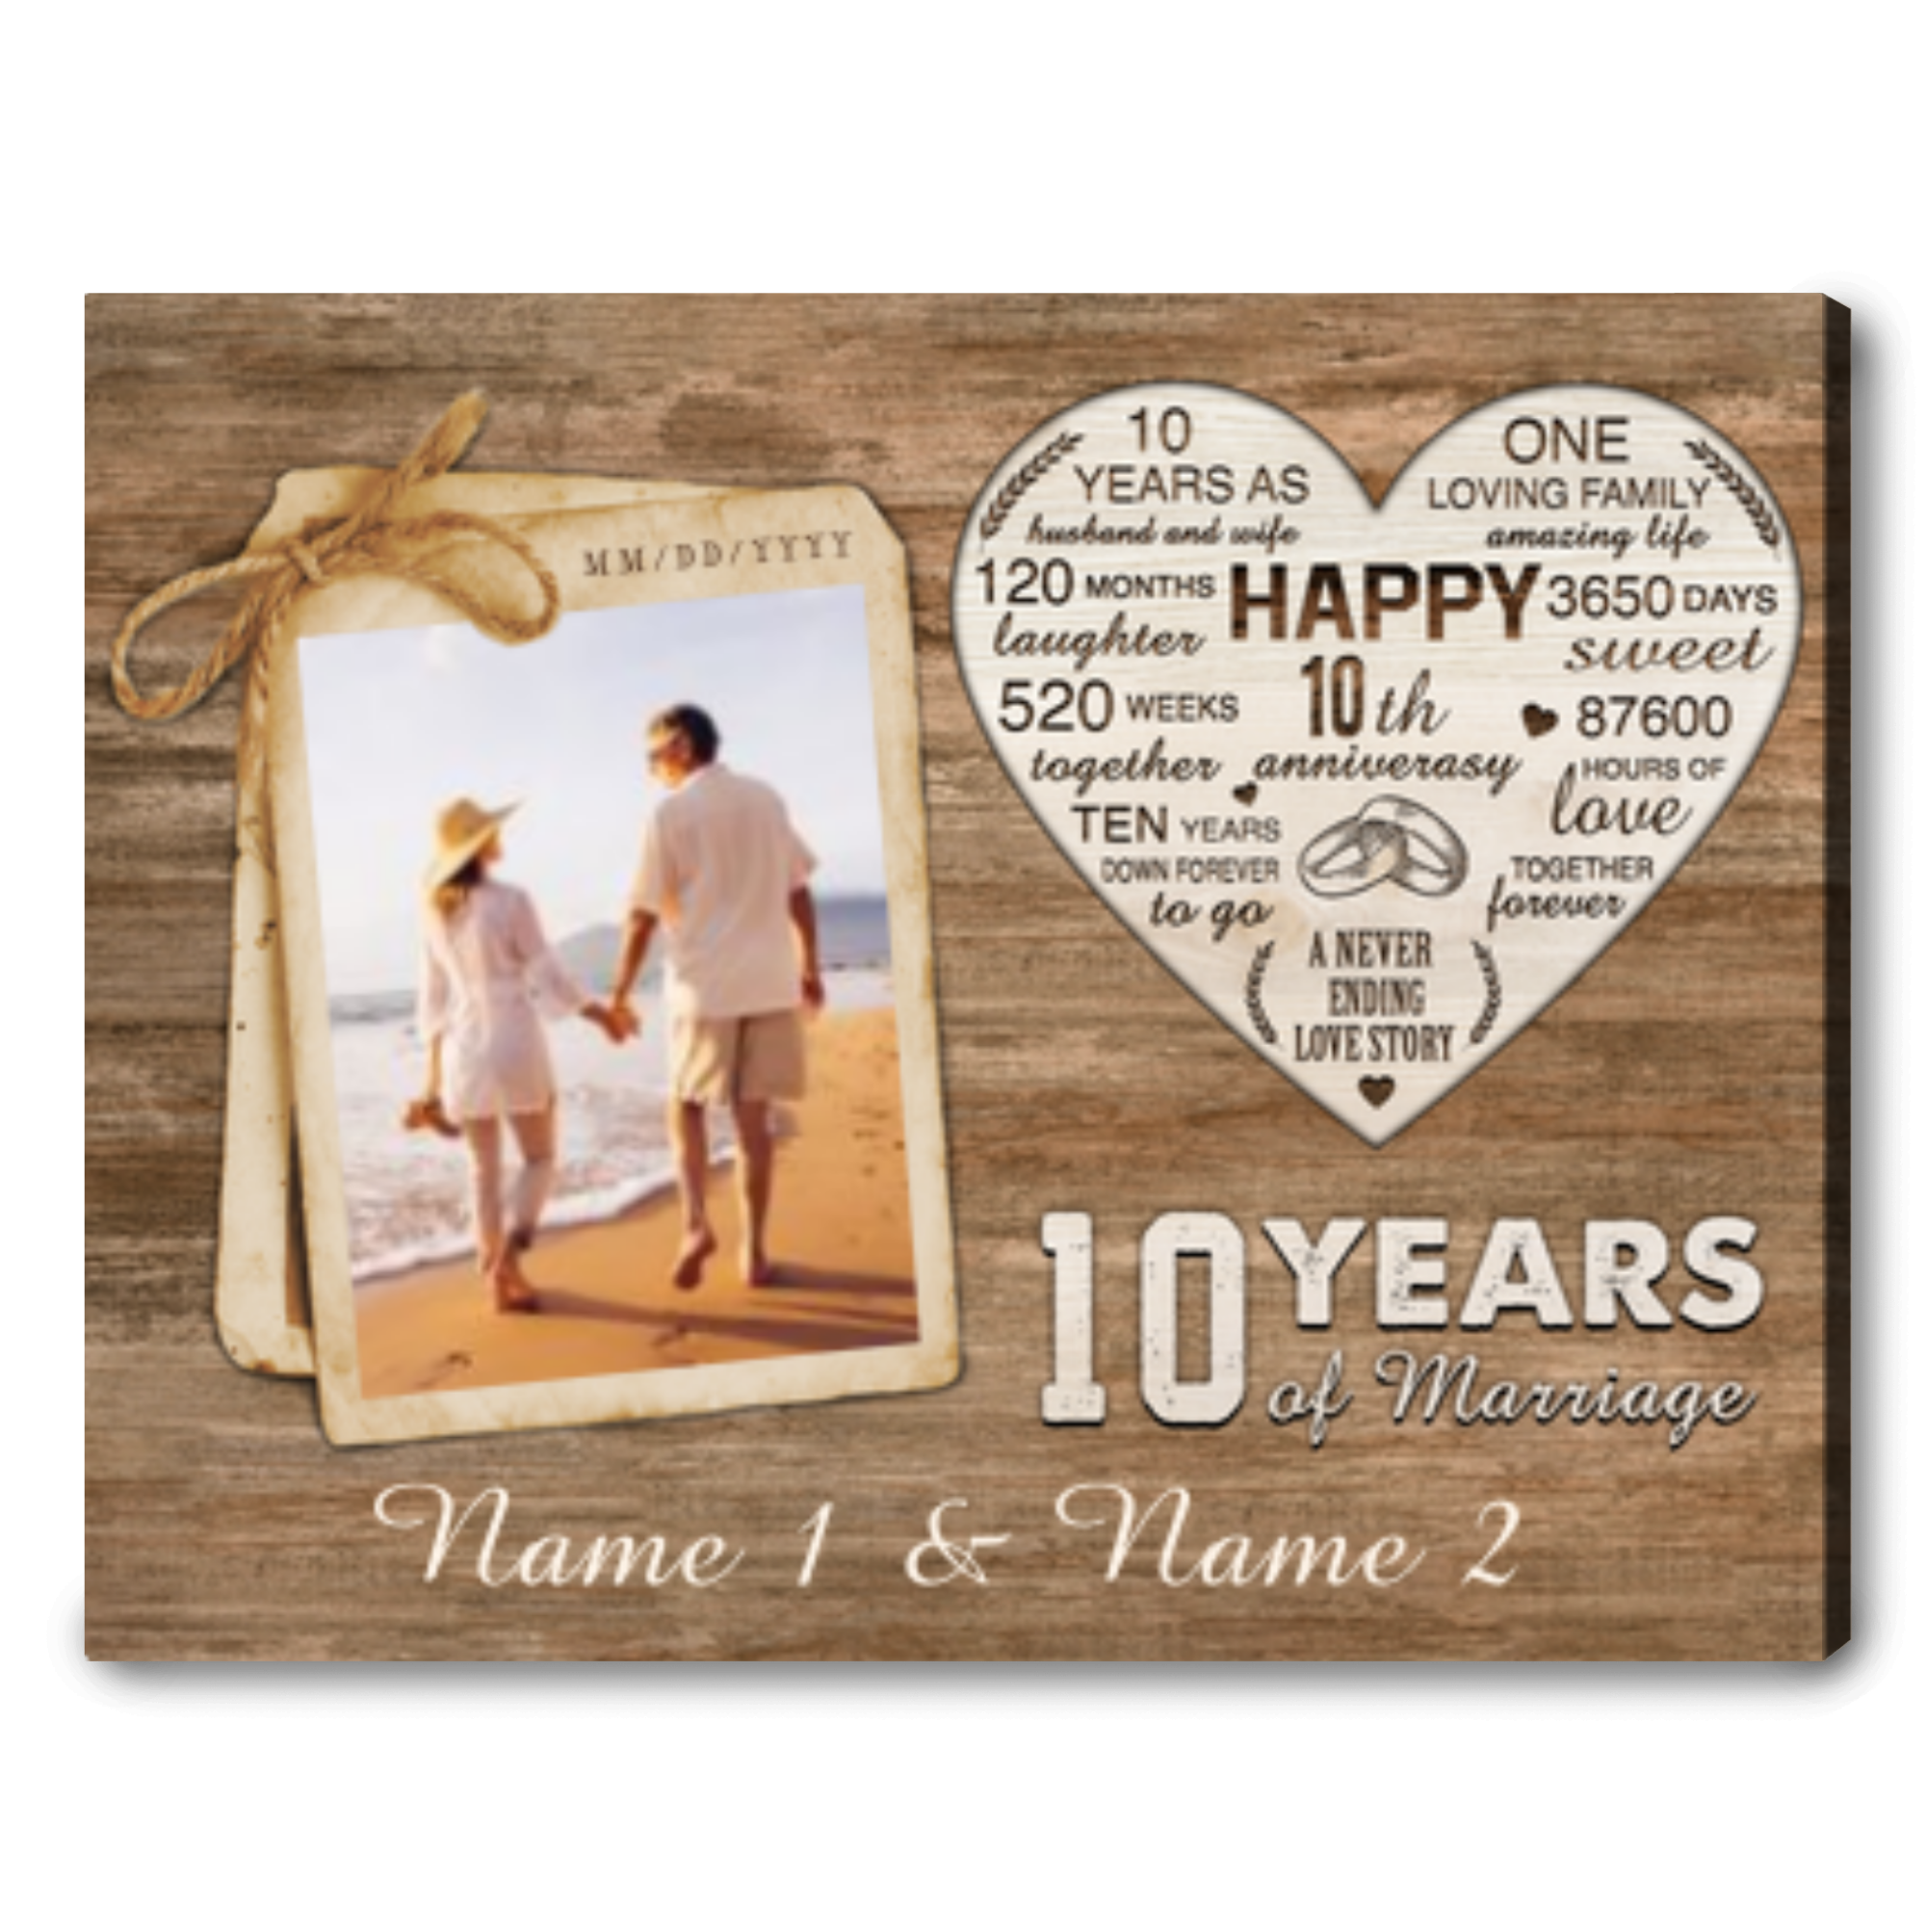 YLOVAN 12.5x8.5 Marriage Wood Sign - Wedding Gifts for Couples Wife Husband  Anniversary Newlywed Gif…See more YLOVAN 12.5x8.5 Marriage Wood Sign 